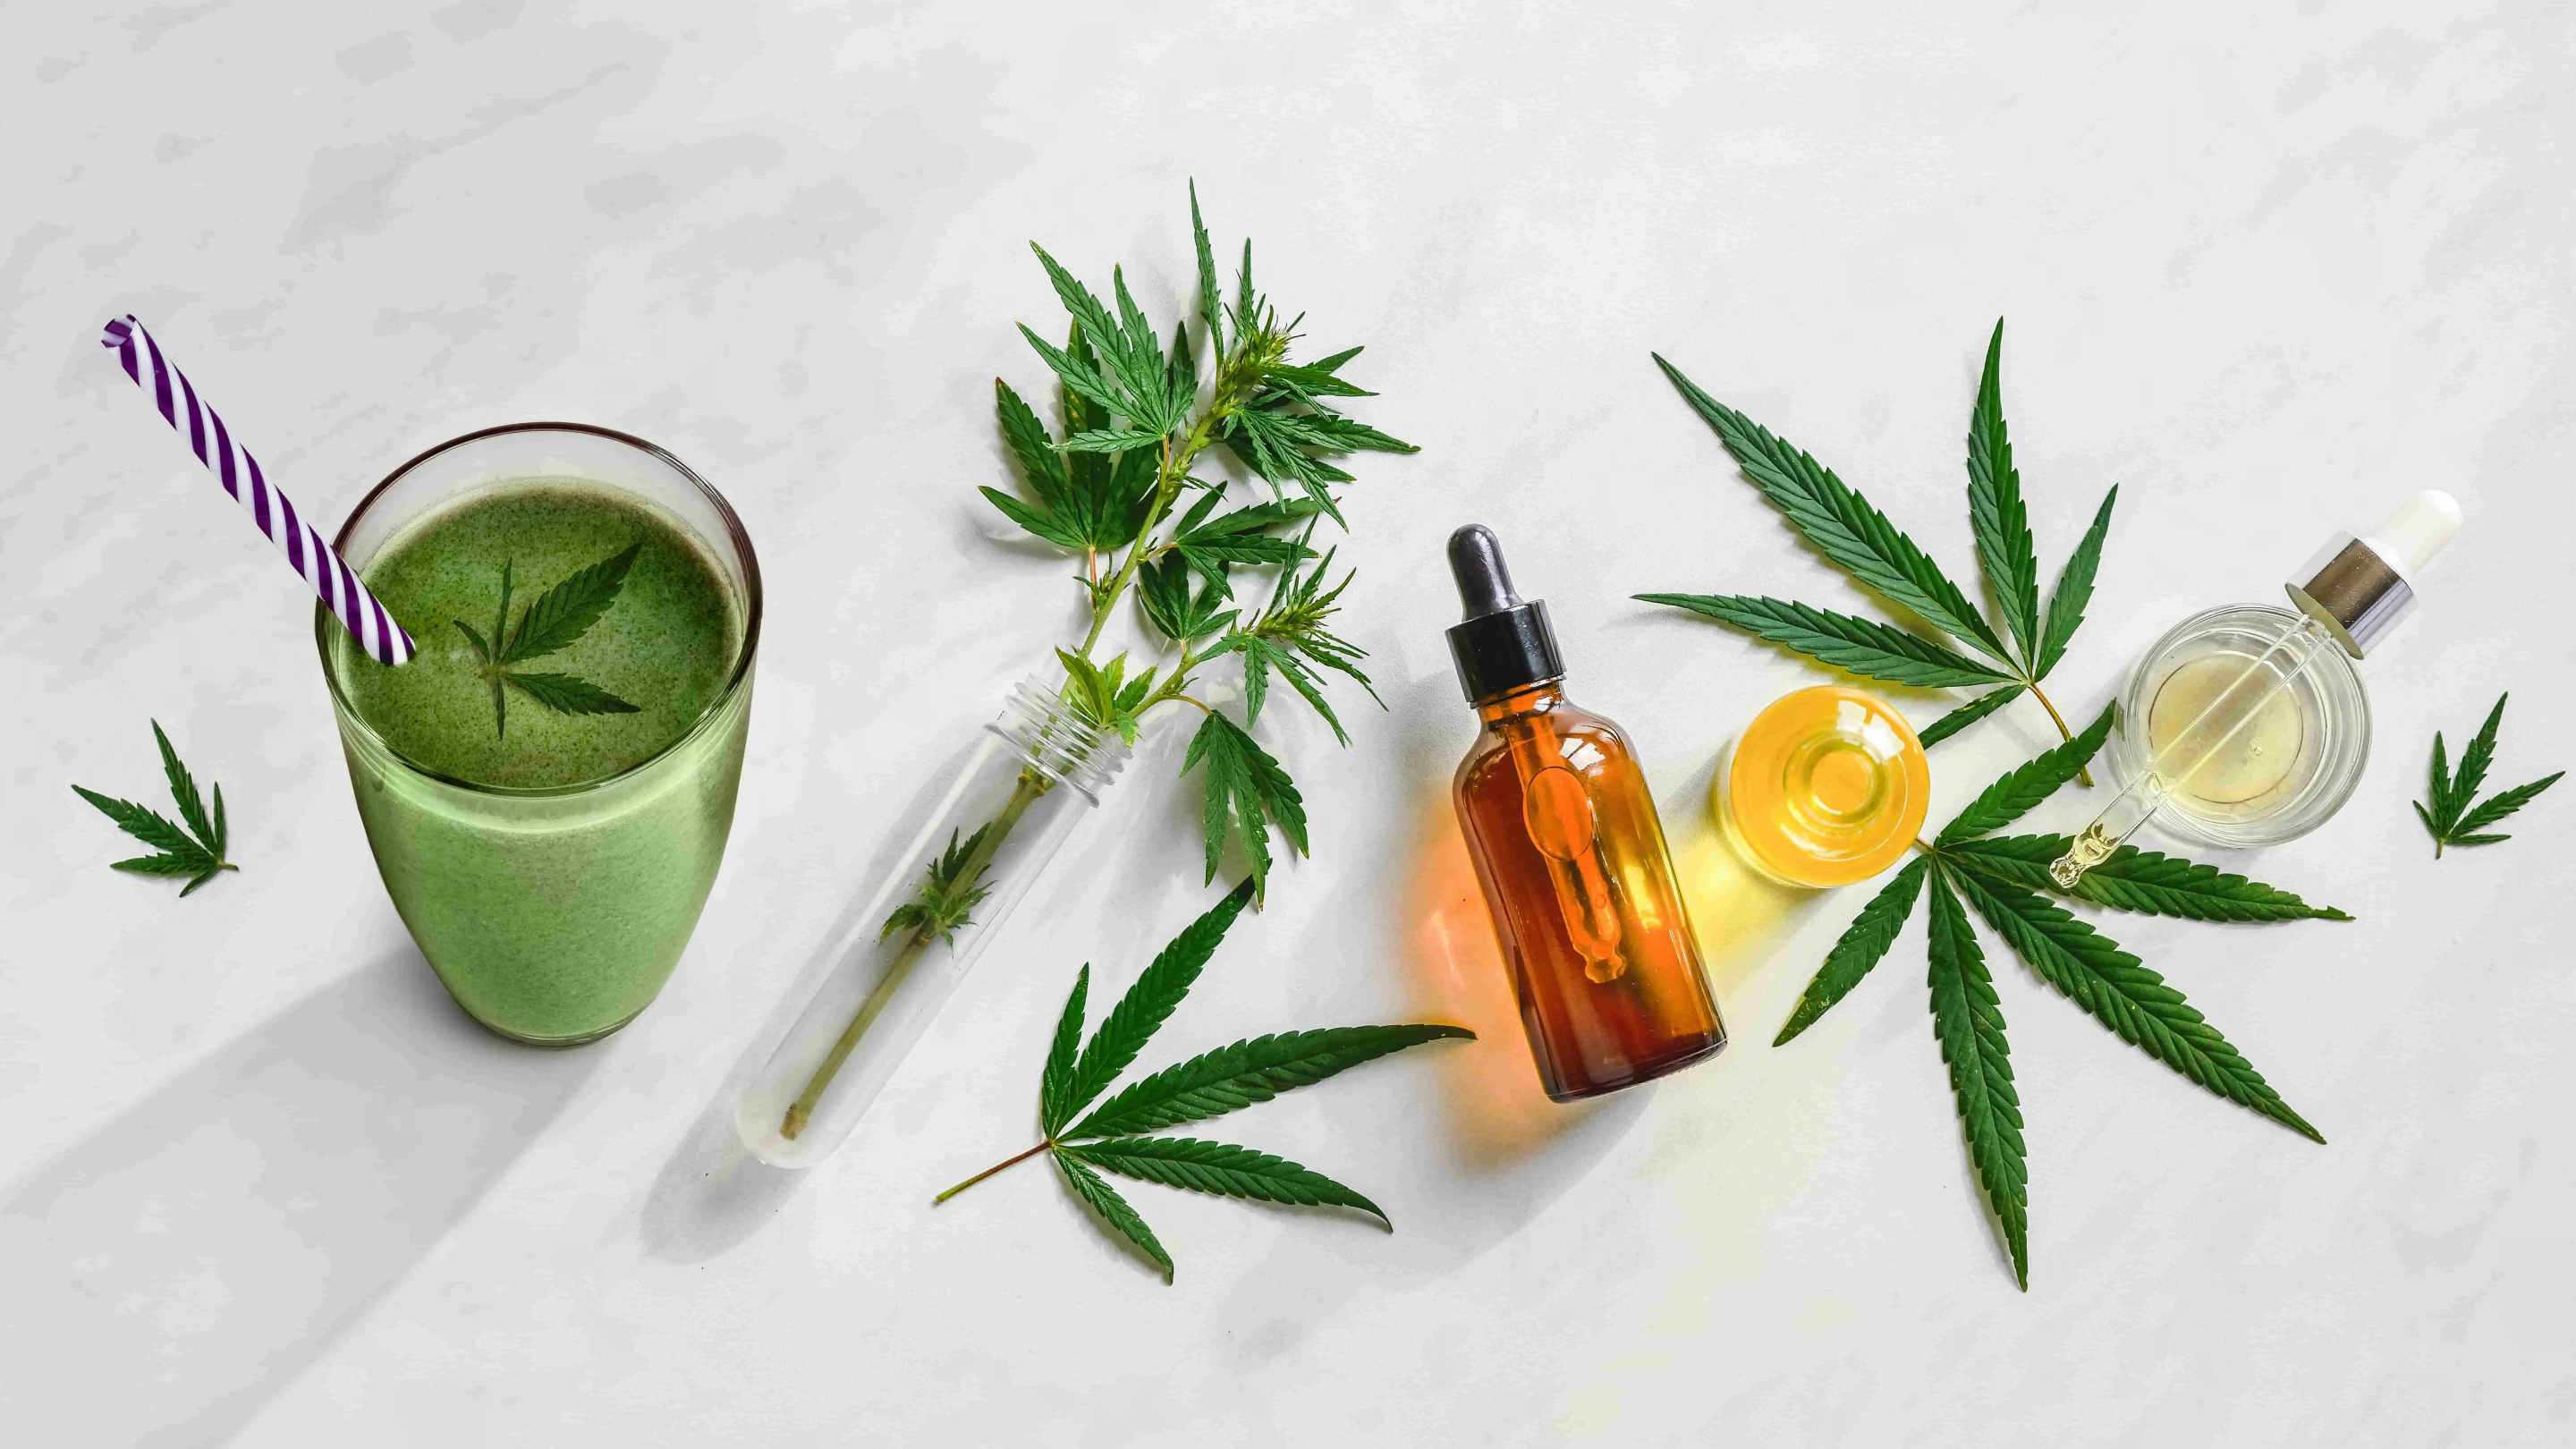 Goodbye Stoner Stereotypes: How to Use Cannabis for Wellness